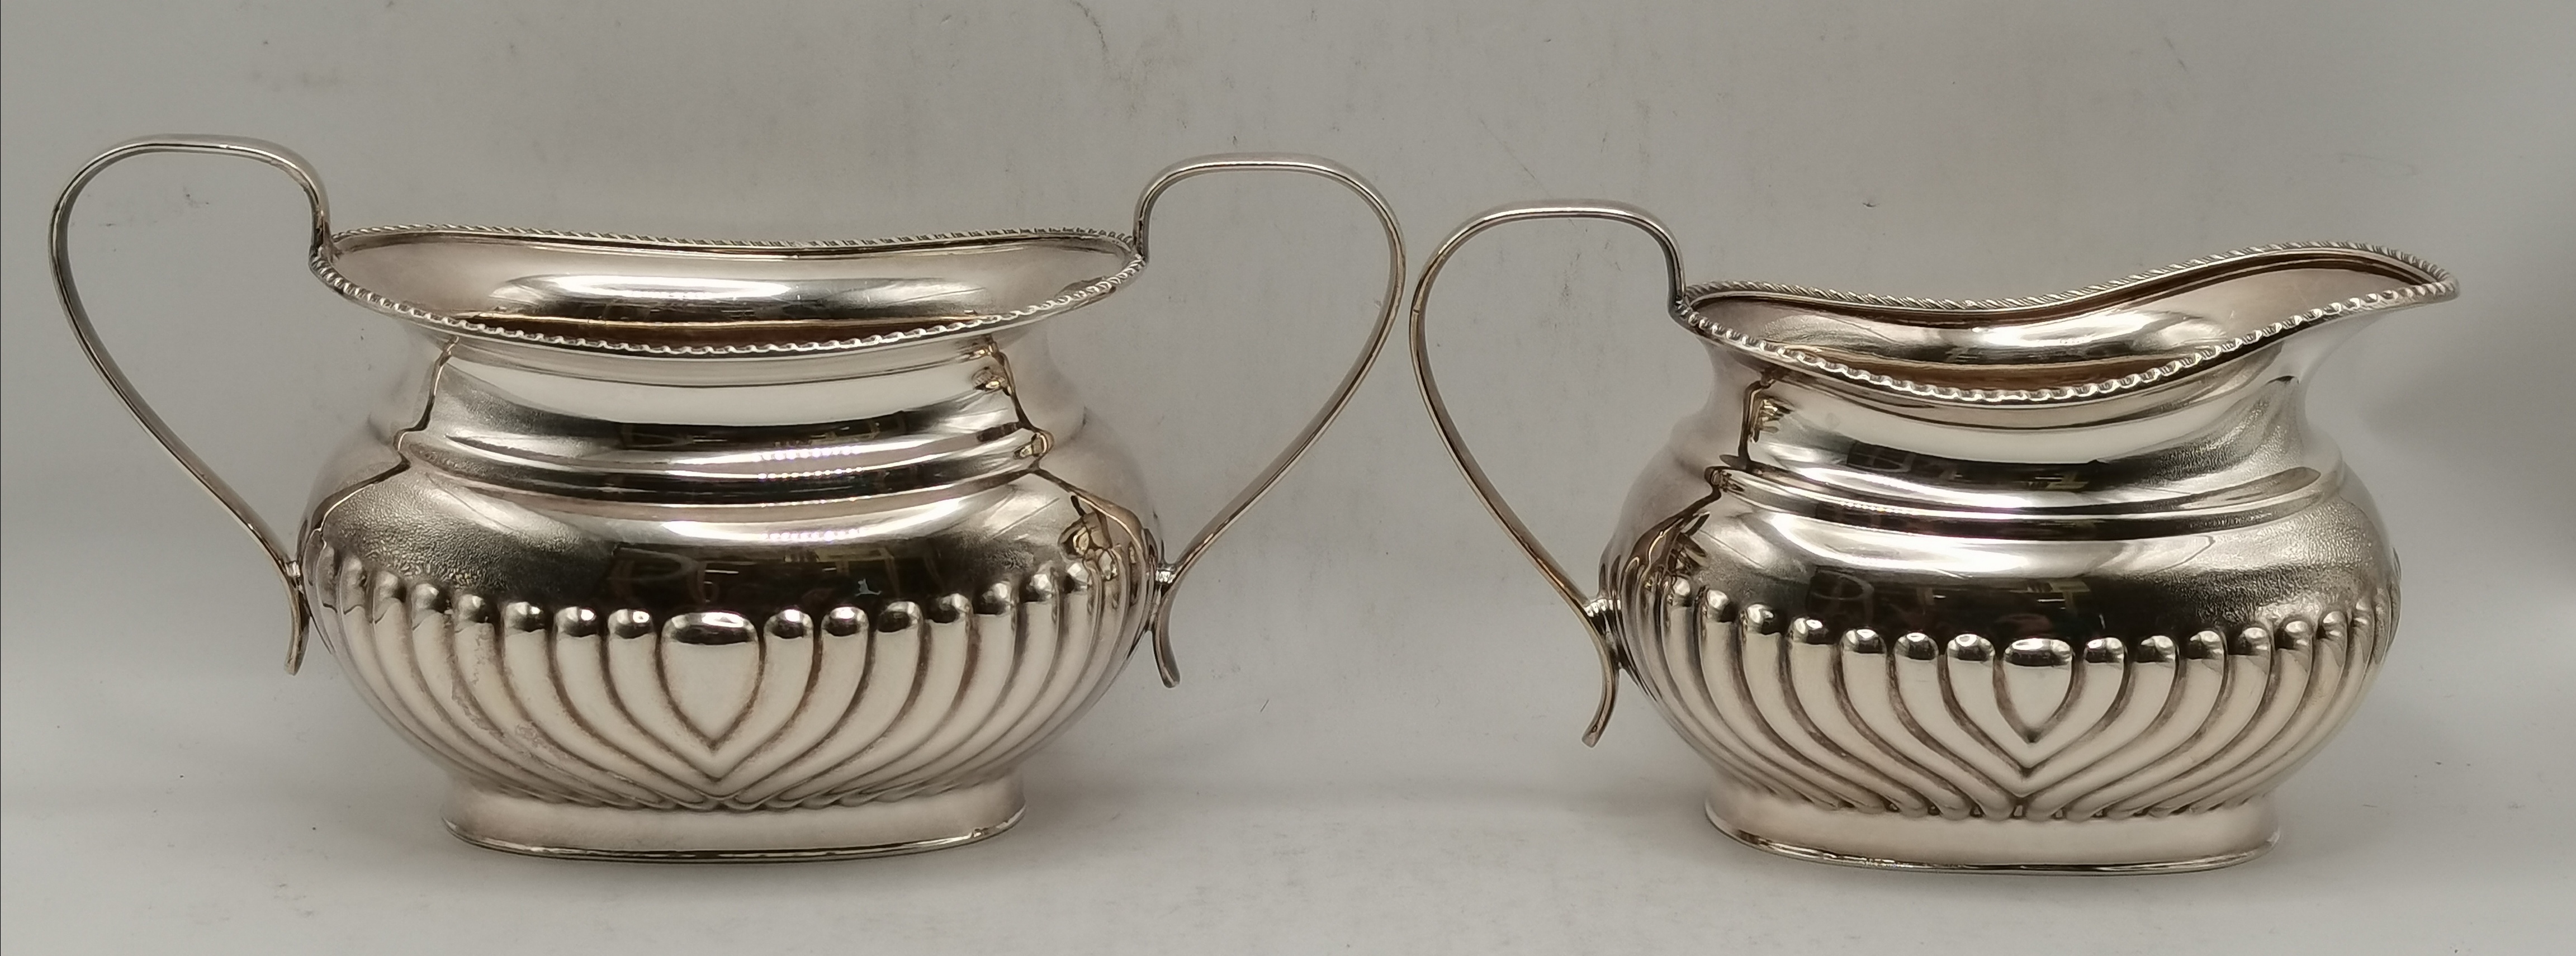 A silver-plated four-piece tea and coffee service - Image 4 of 5